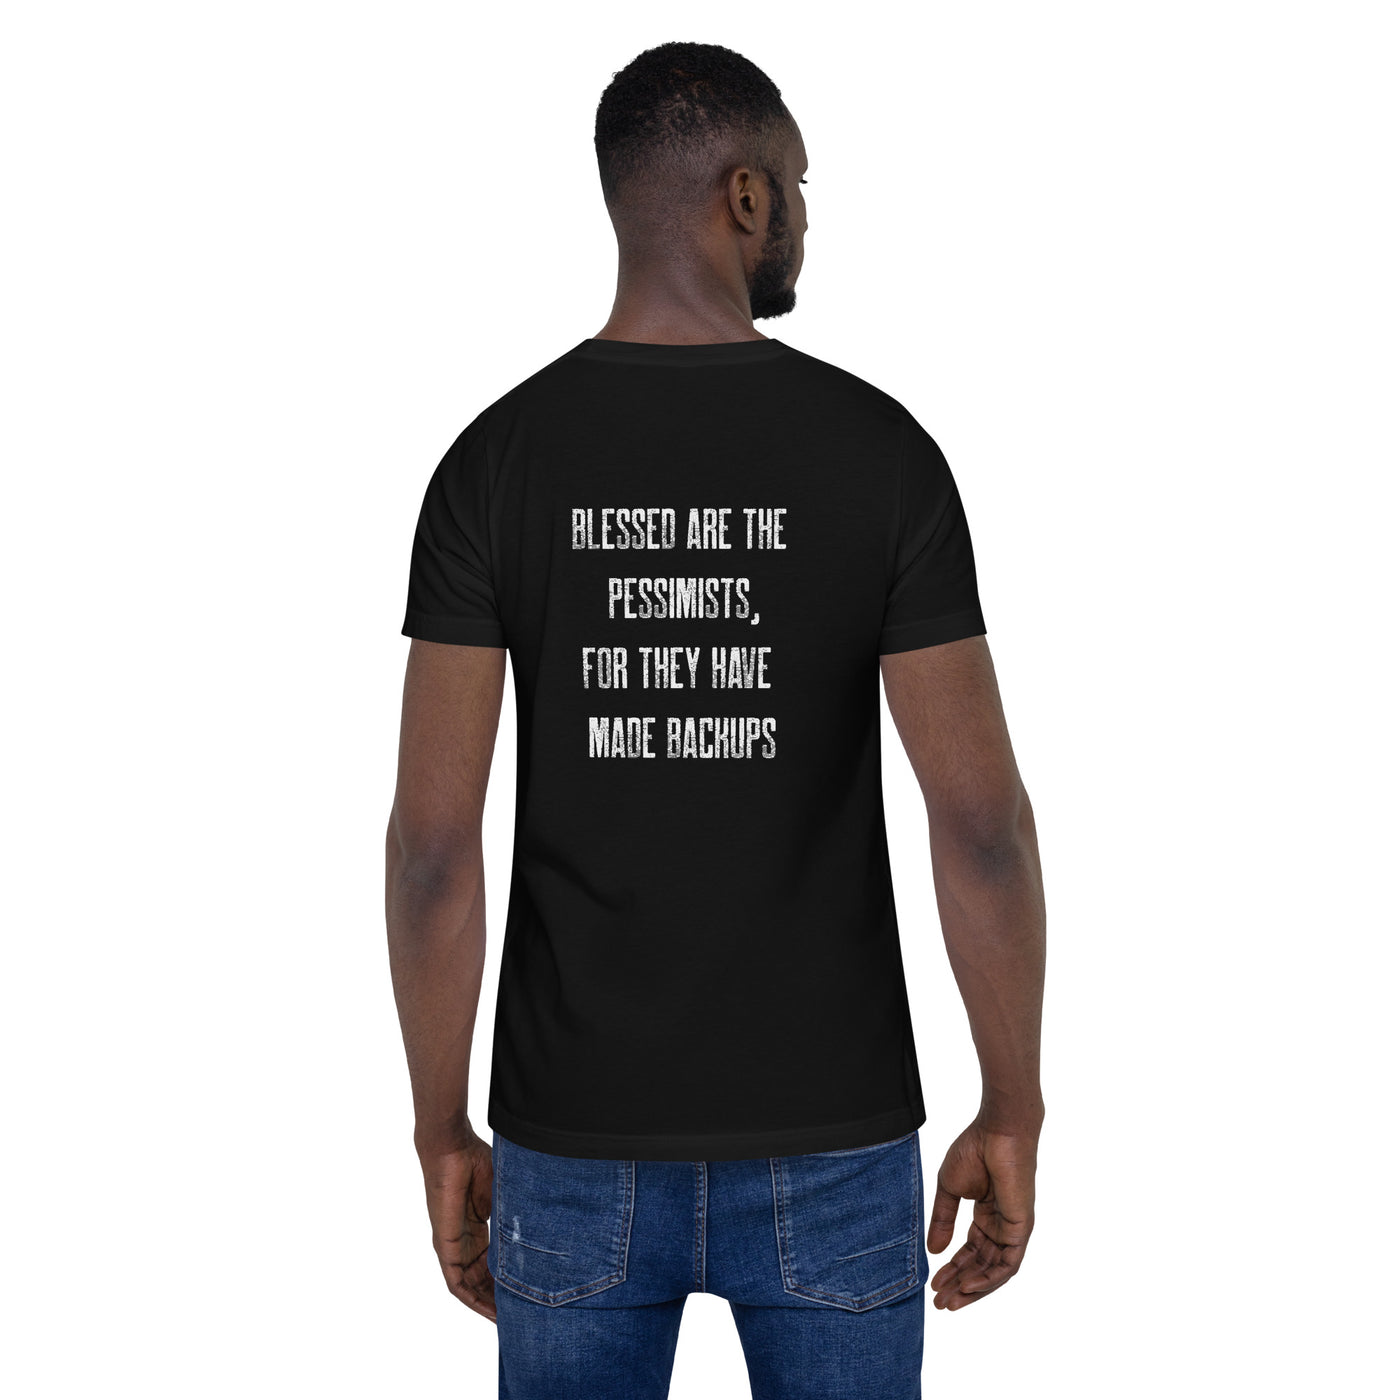 Blessed are the pessimists for they have made backups -Unisex t-shirt ( Back Print )